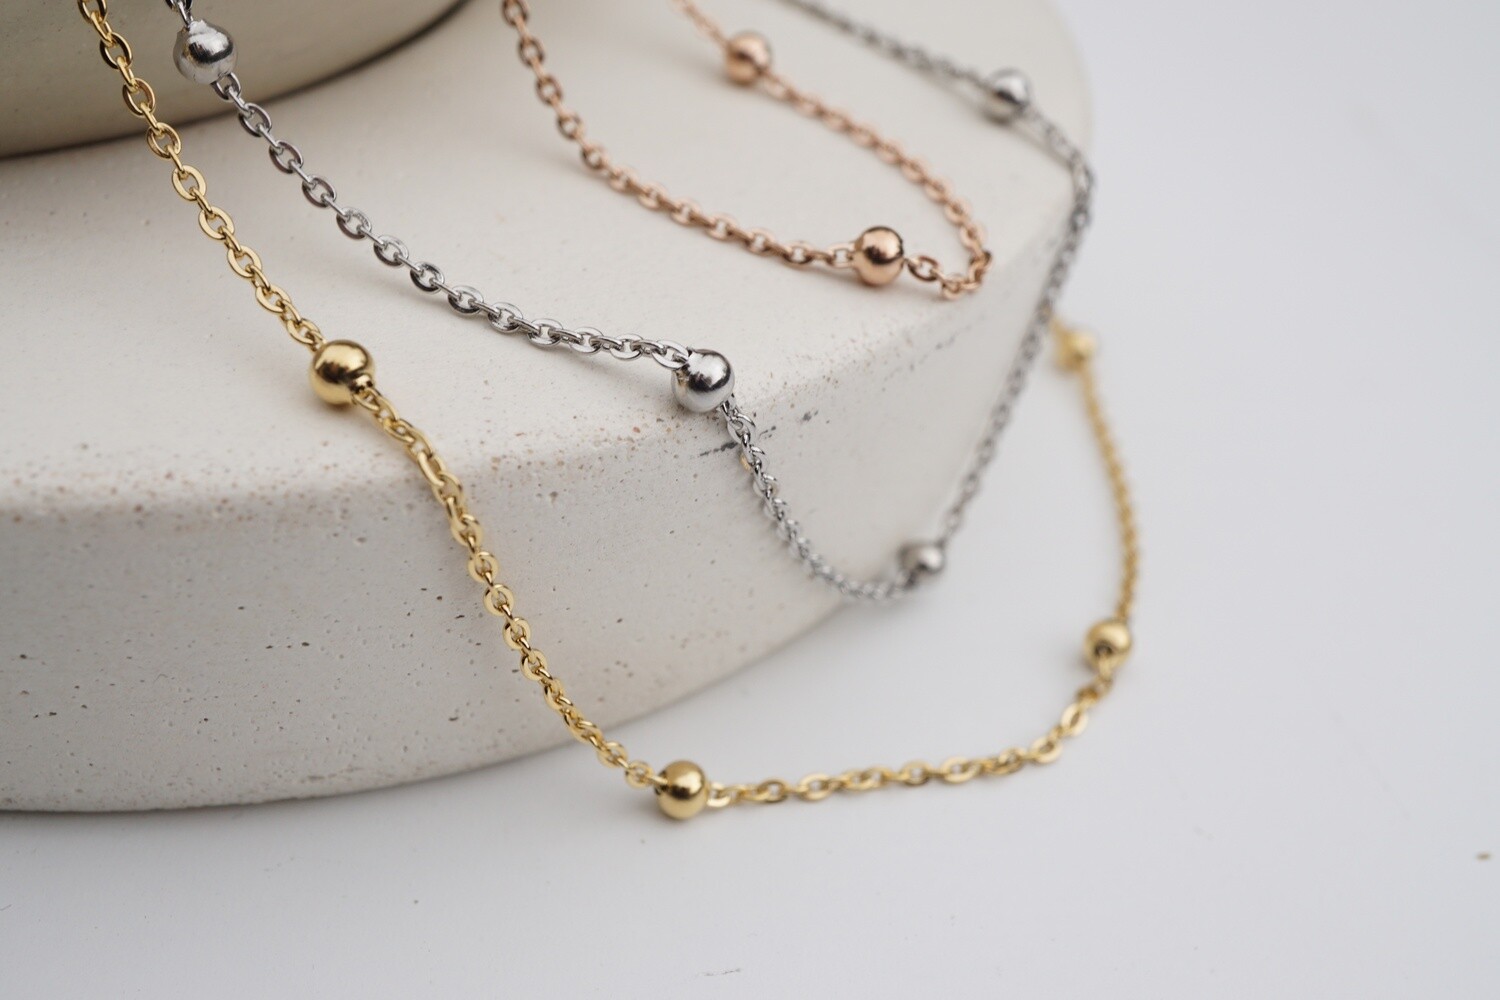 Ball Chain - Chains sold individually